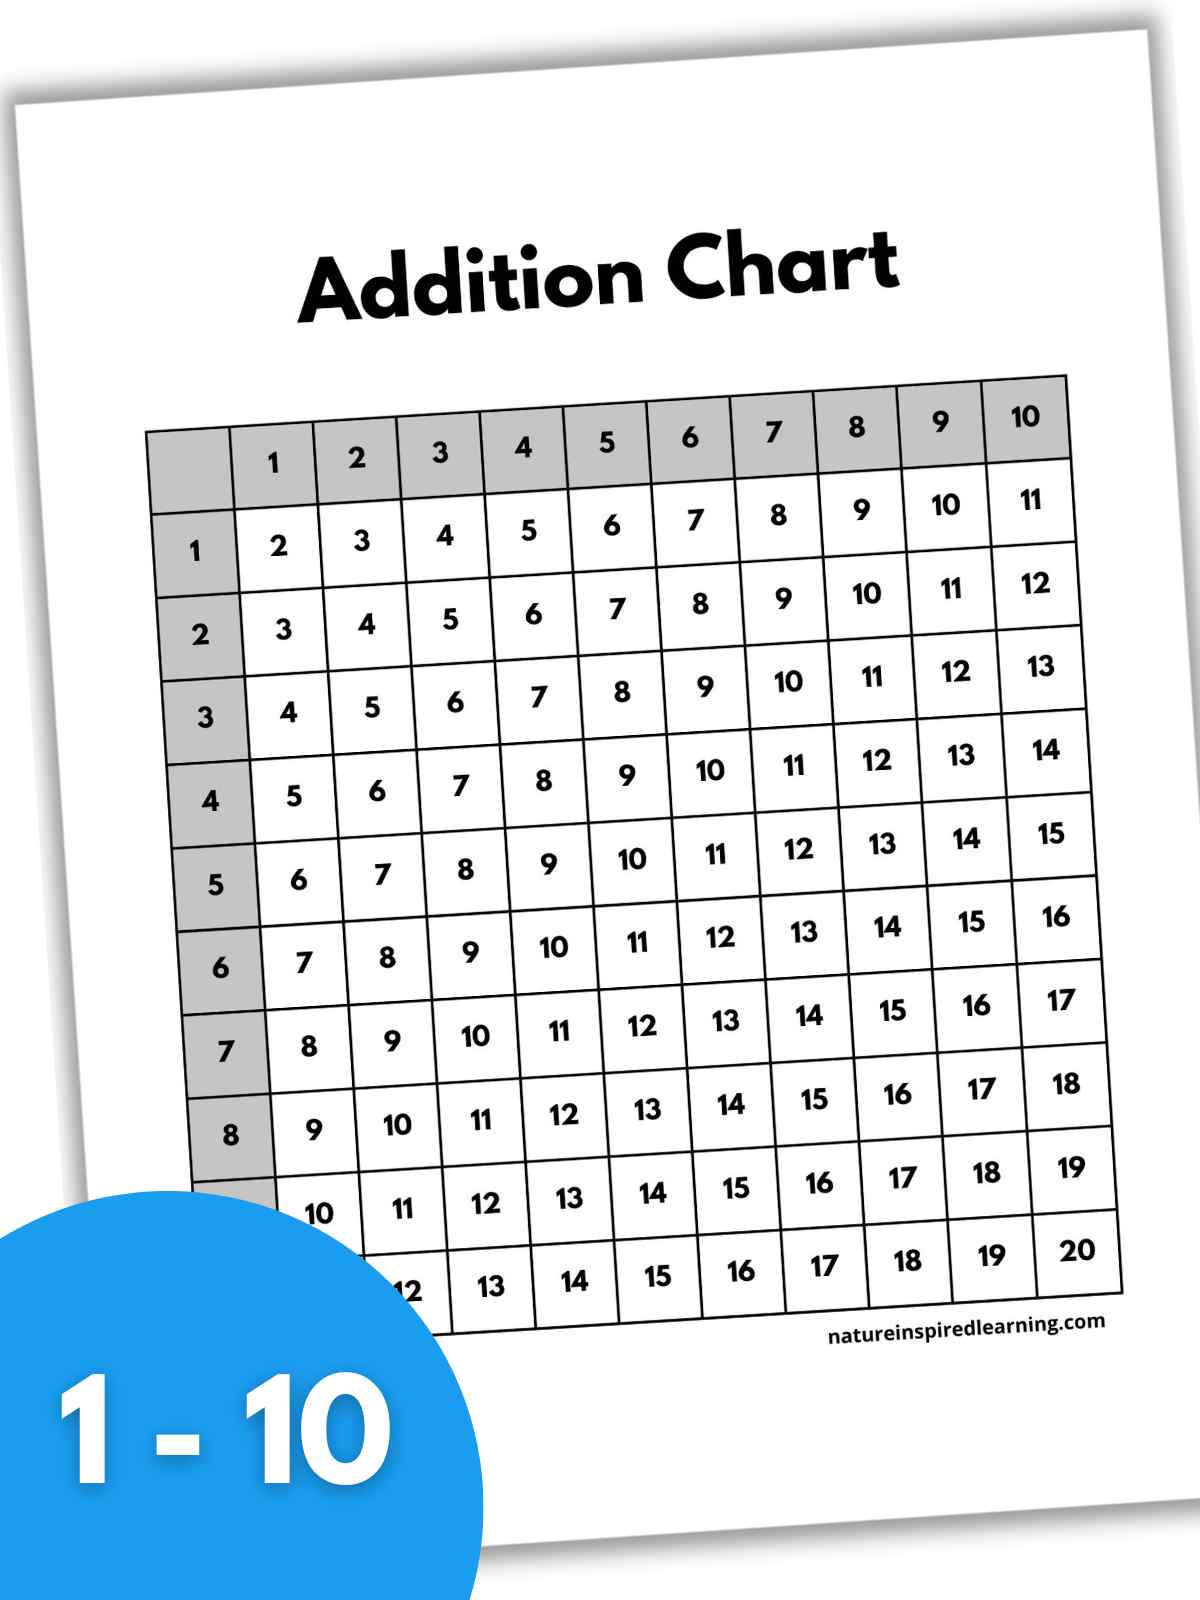 Black and white addition chart with numbers 1-10 with grey background on the first row and down the first column. Printable slanted with a drop shadow with a bright blue circle bottom left with white numbers overlay